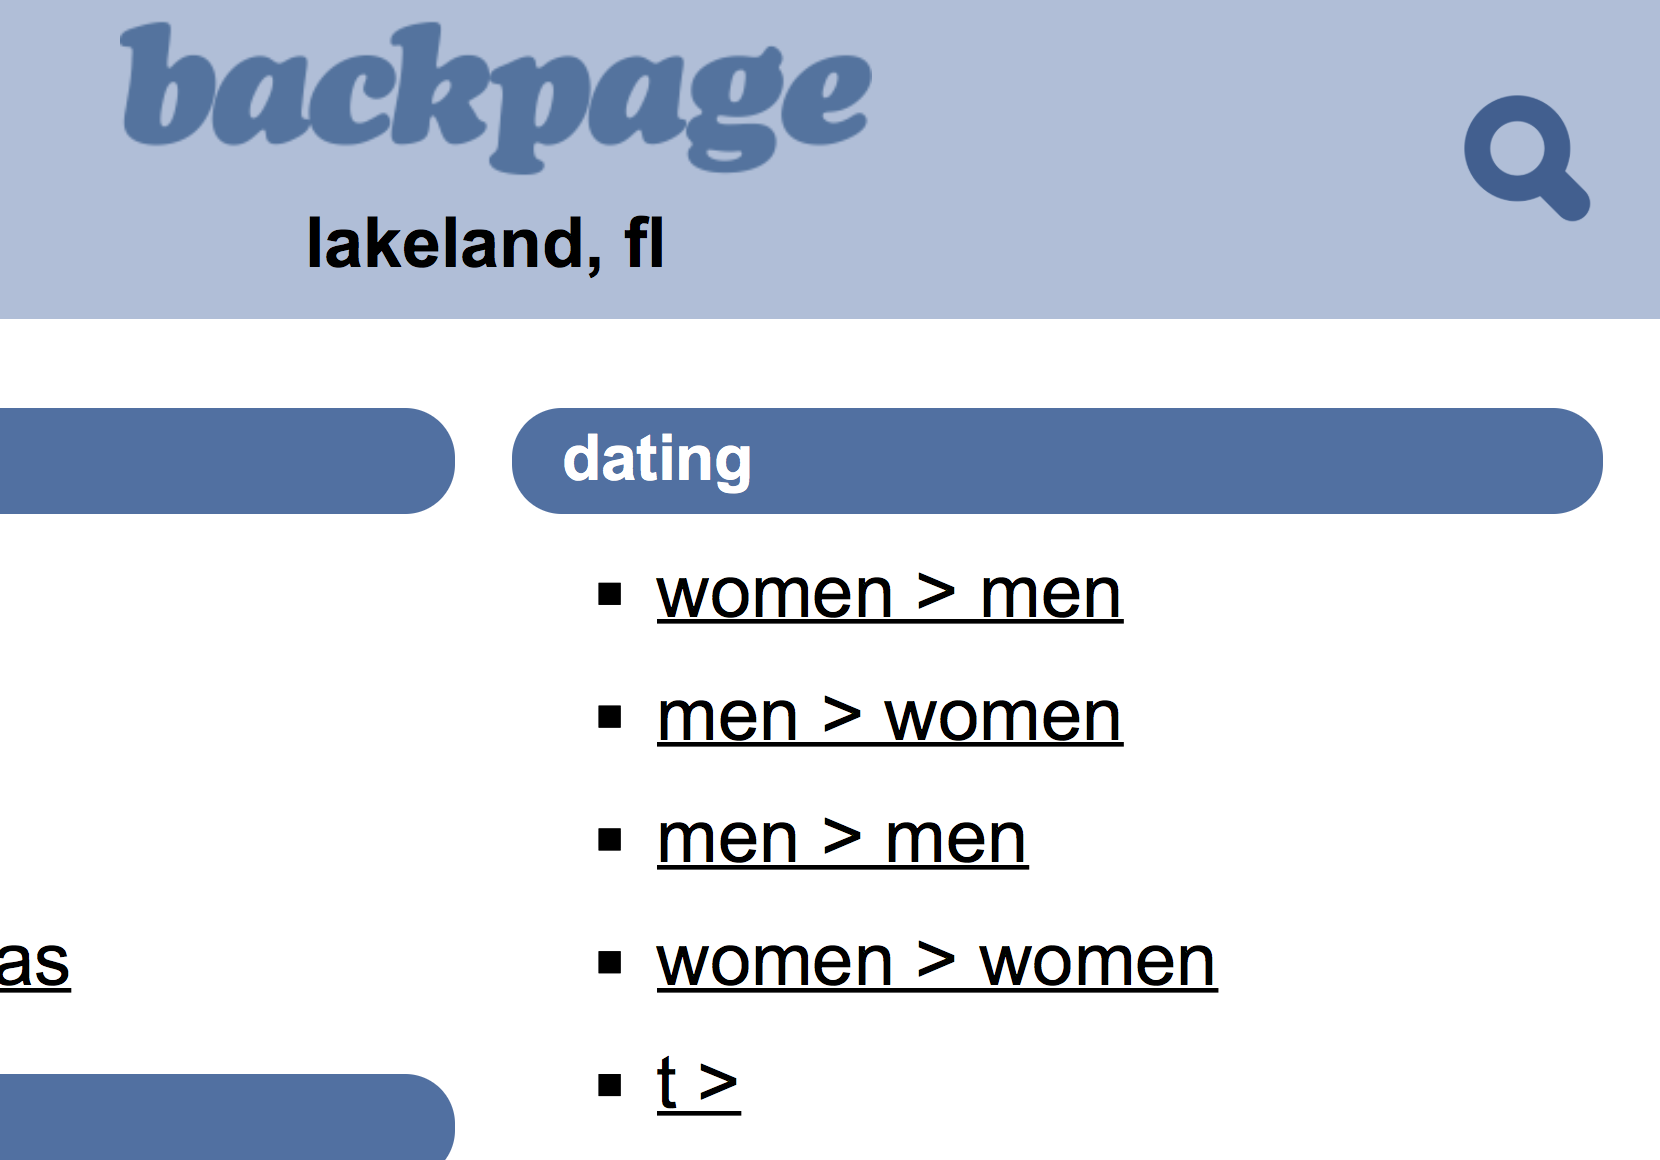 brittany packard recommends www tampa backpage com pic